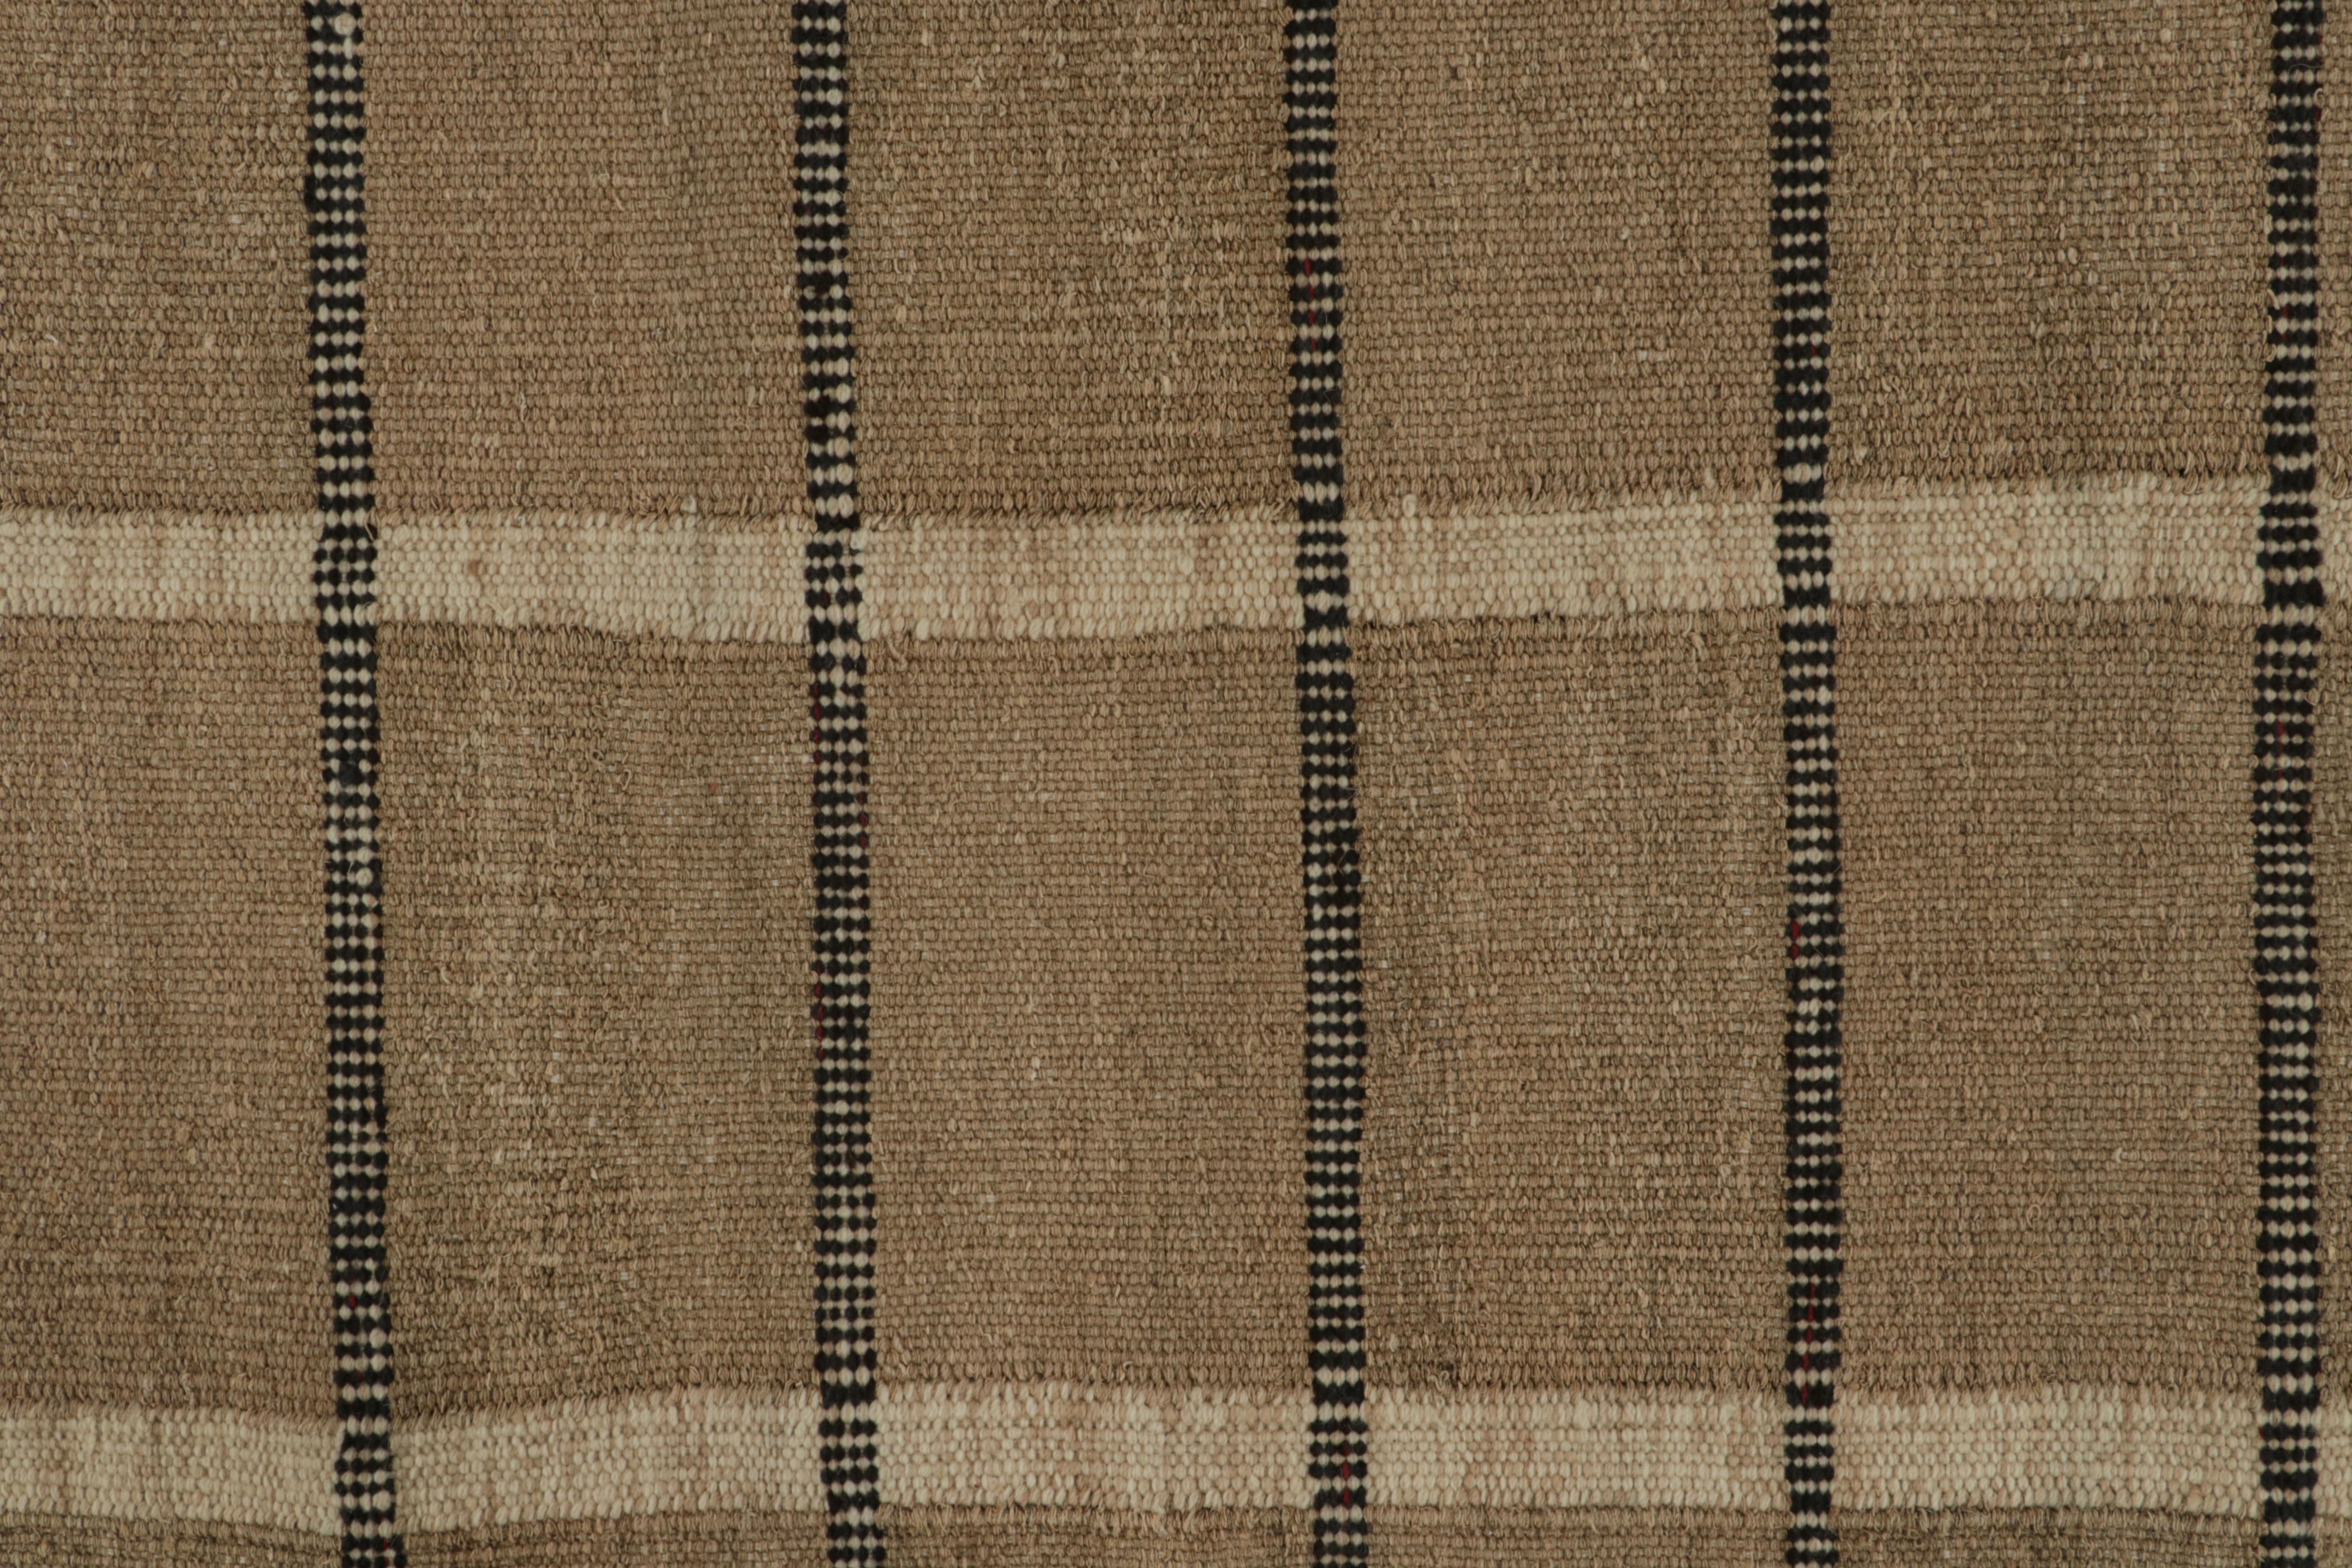 Rug & Kilim’s Scandinavian Style Kilim runner & Hemp Rug in Beige-Brown Stripes In New Condition For Sale In Long Island City, NY